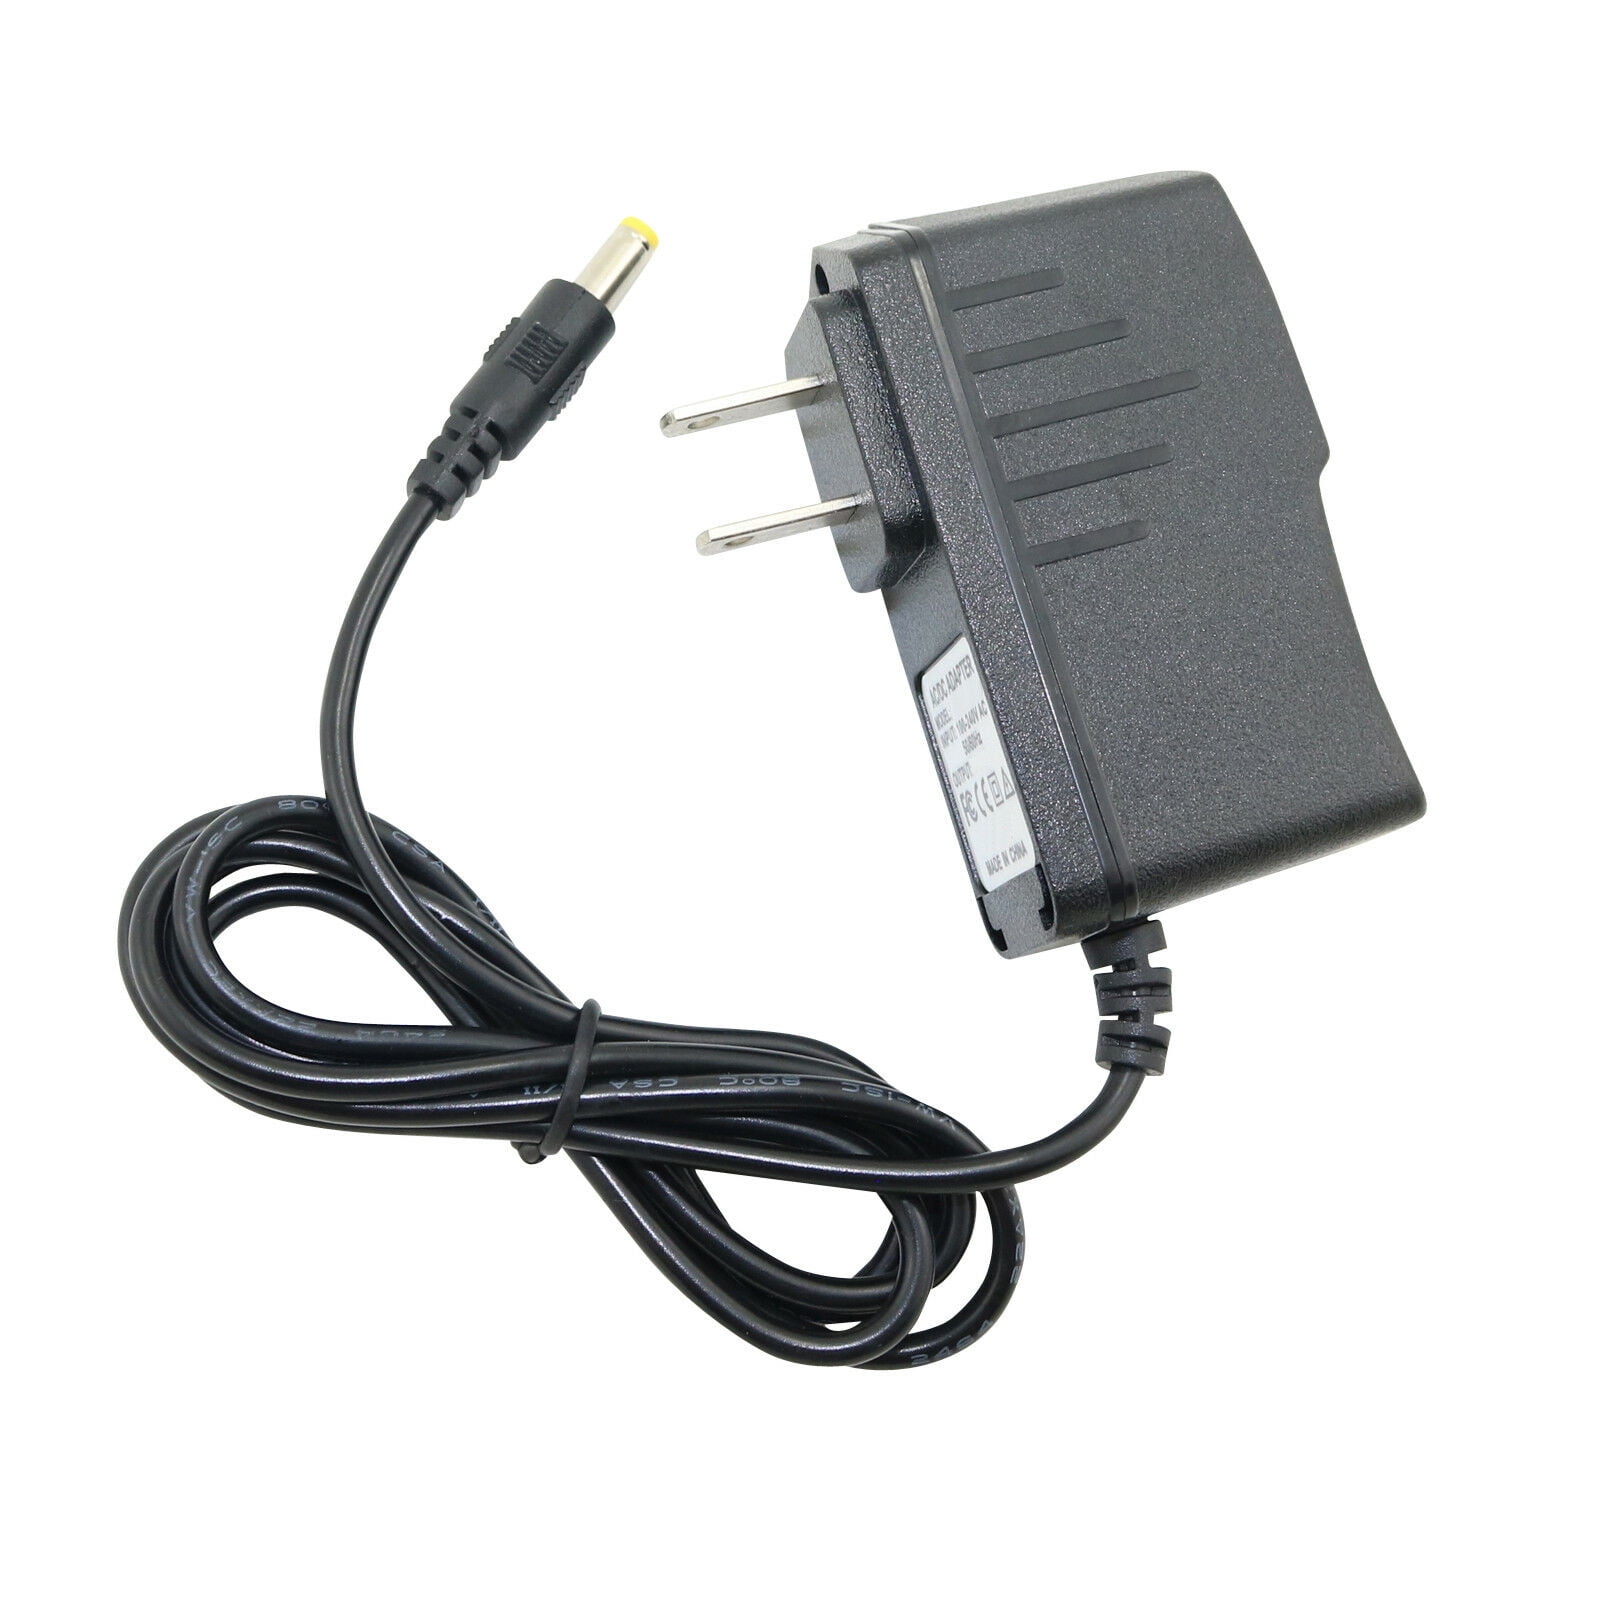 AC Adapter Power Supply for Rosewill RNX-EasyN400 Wireless-N Broadband Router